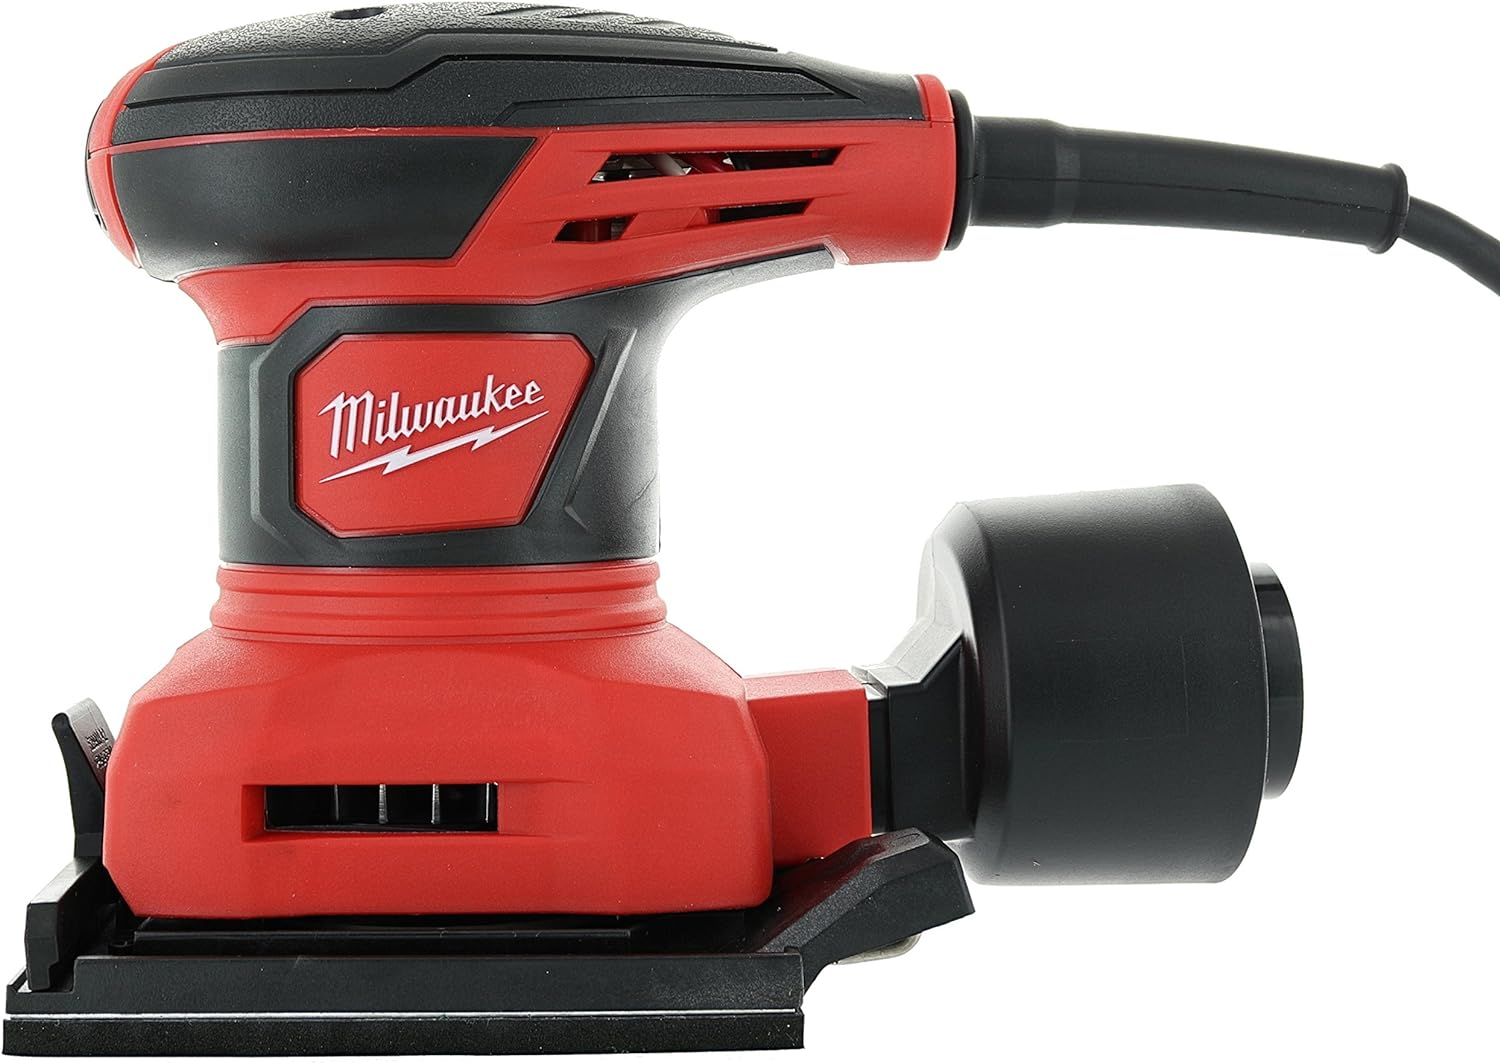 Milwaukee 6033-21 3 Amp 1/4 Sheet Orbital 14,000 OBM Compact Palm Sander with Dust Canister (2 Sheets of Sandpaper Included)